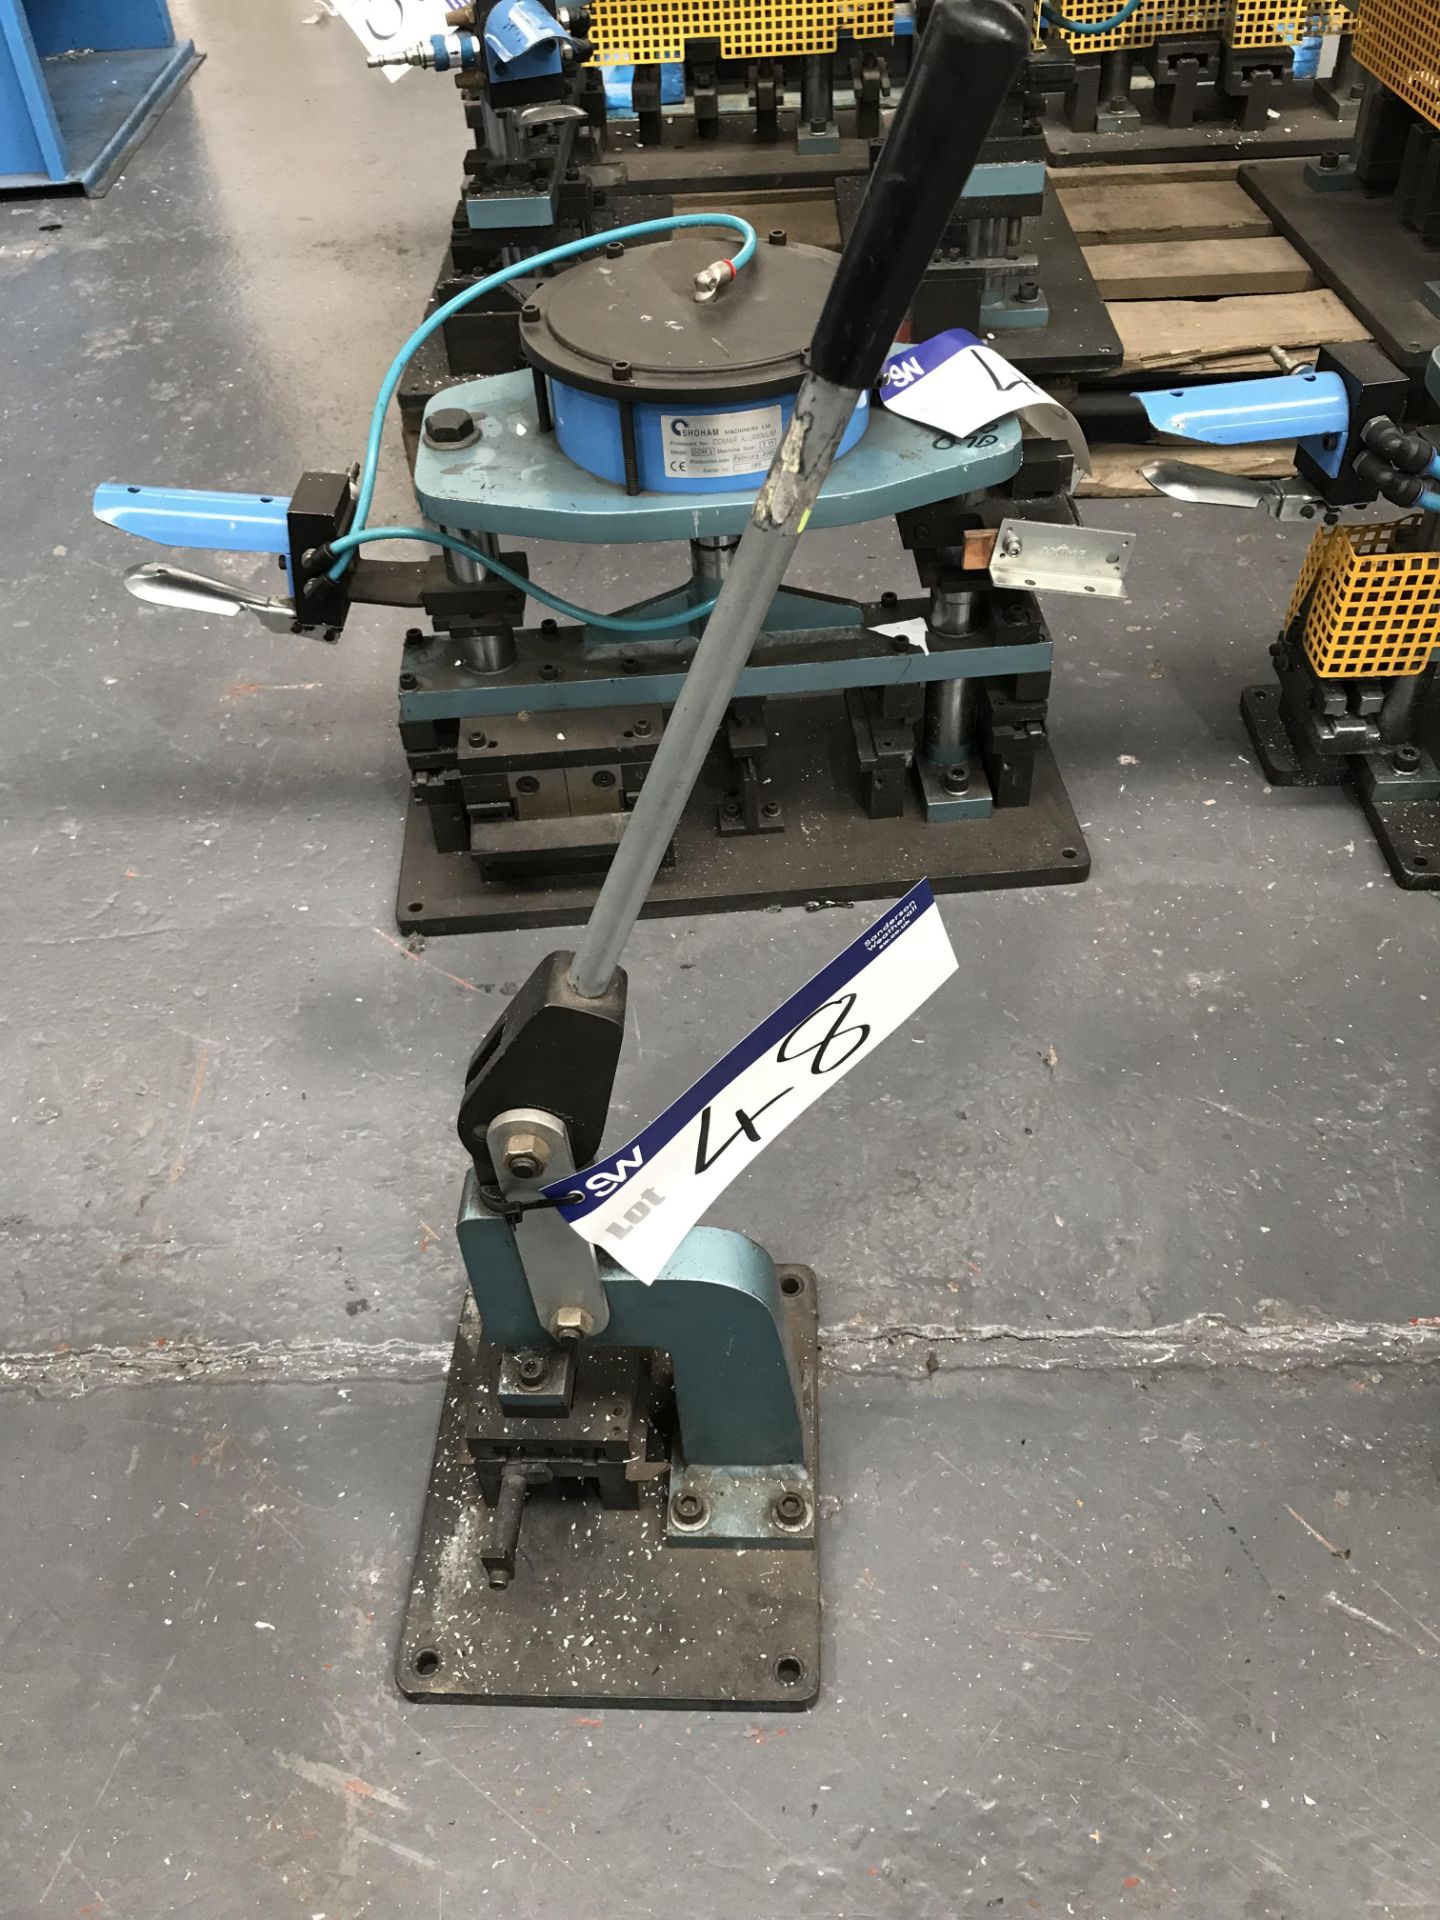 Shoham Manual Punch Tool, Model COM6 Type T4, serial no. 630, year of manufacture 2005Please read